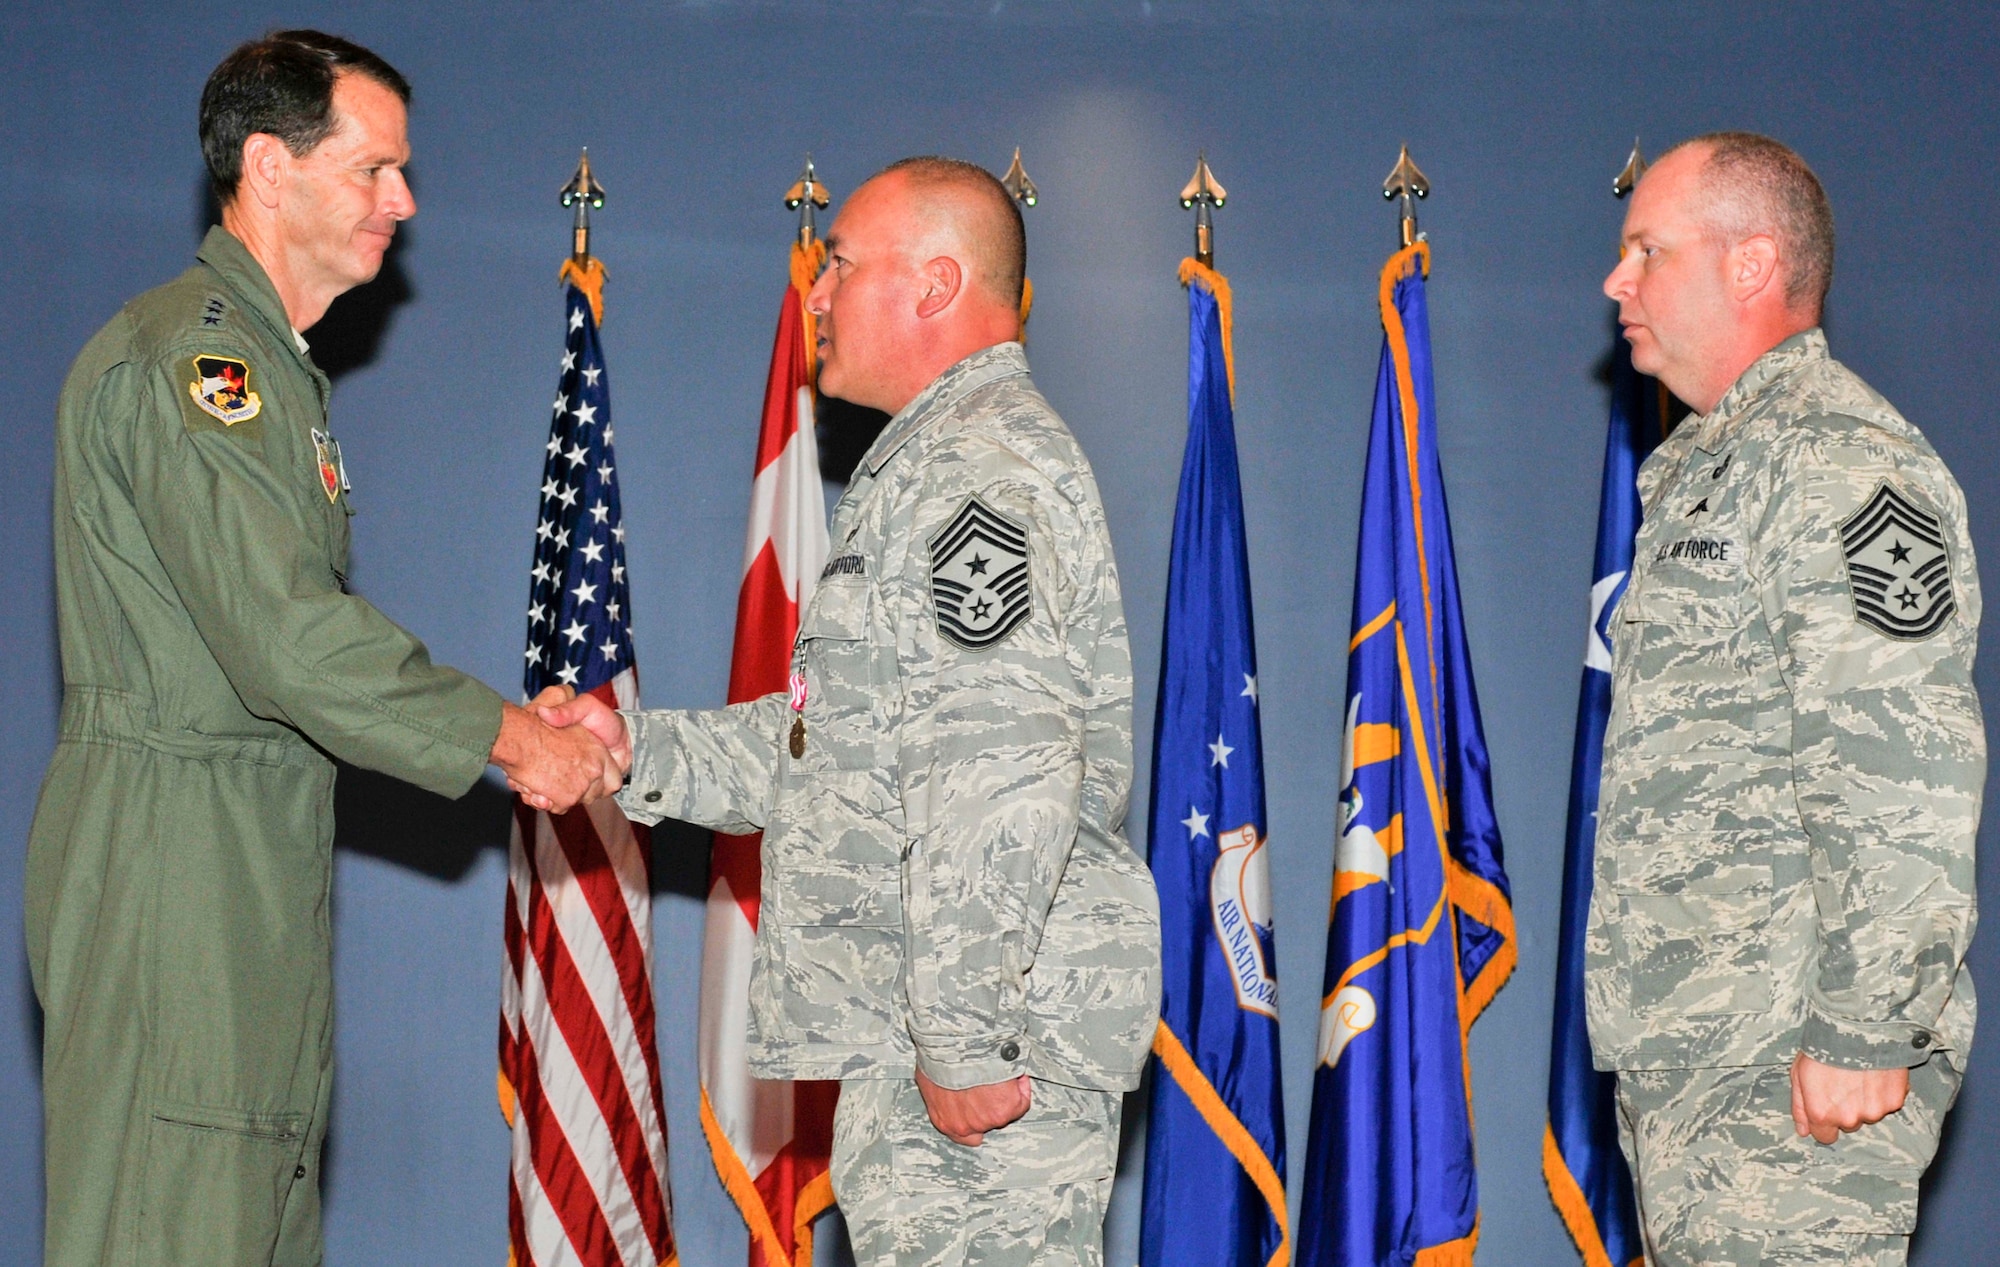 Chief Master Sgt. Mitchell Brush (center), the former Air Forces Northern command chief, passes his command chief coin to Lt. Gen. Sid Clarke, AFNORTH commander, during a transfer of authority ceremony at Tyndall Air Force Base, Fla., March 23. Chief Brush passed responsibility of the command’s enlisted force to Chief Master Sgt. Jim Hotaling (right). (U.S. Air Force photo by Susan Trahan) 